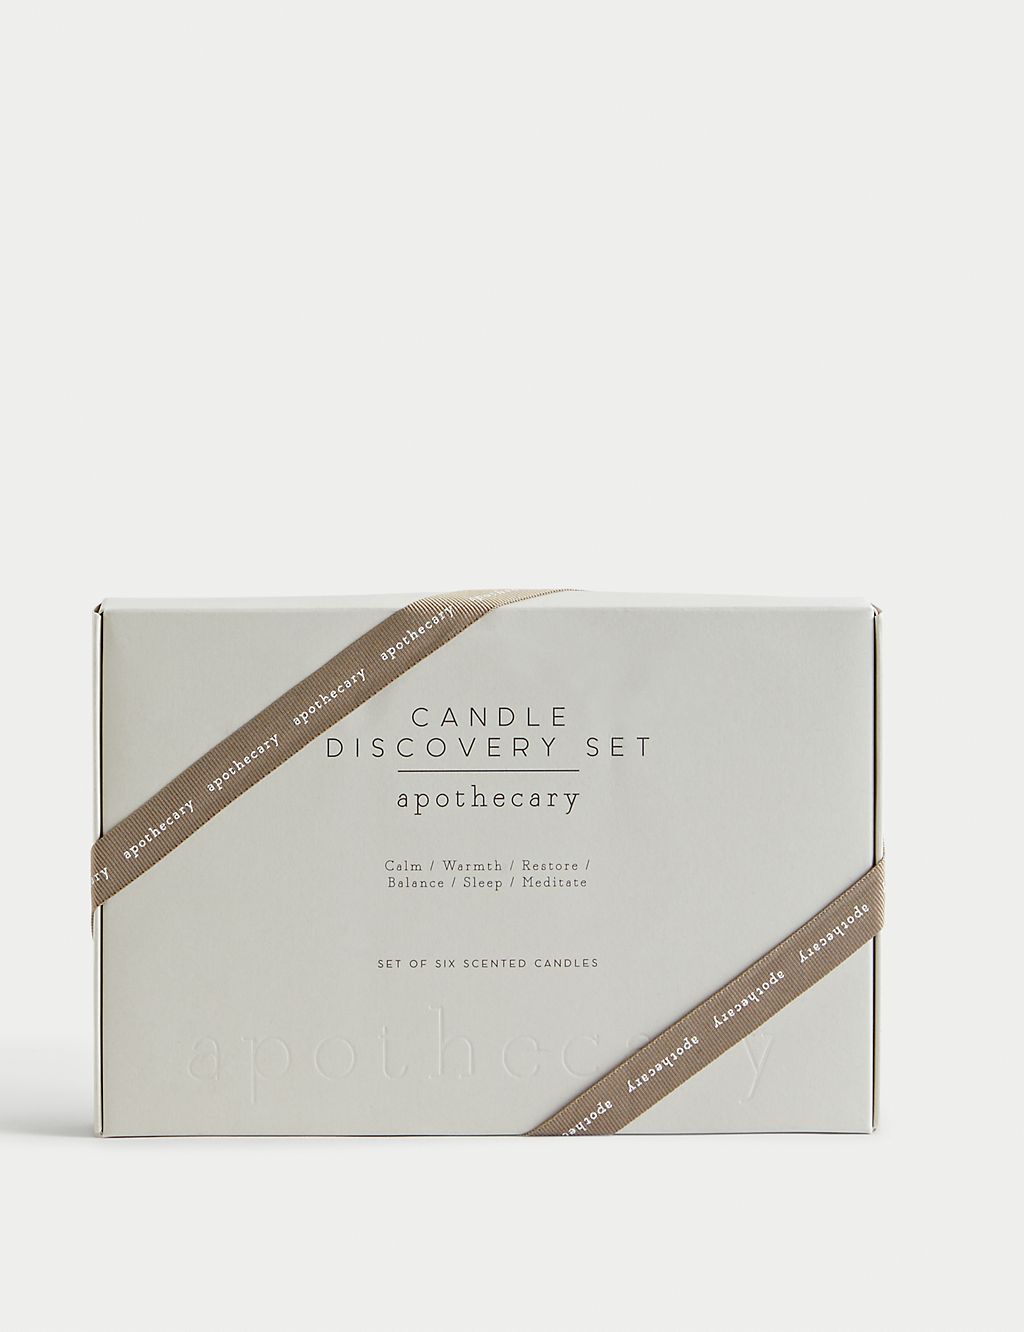 Apothecary Candle Discovery Gift Set 1 of 5